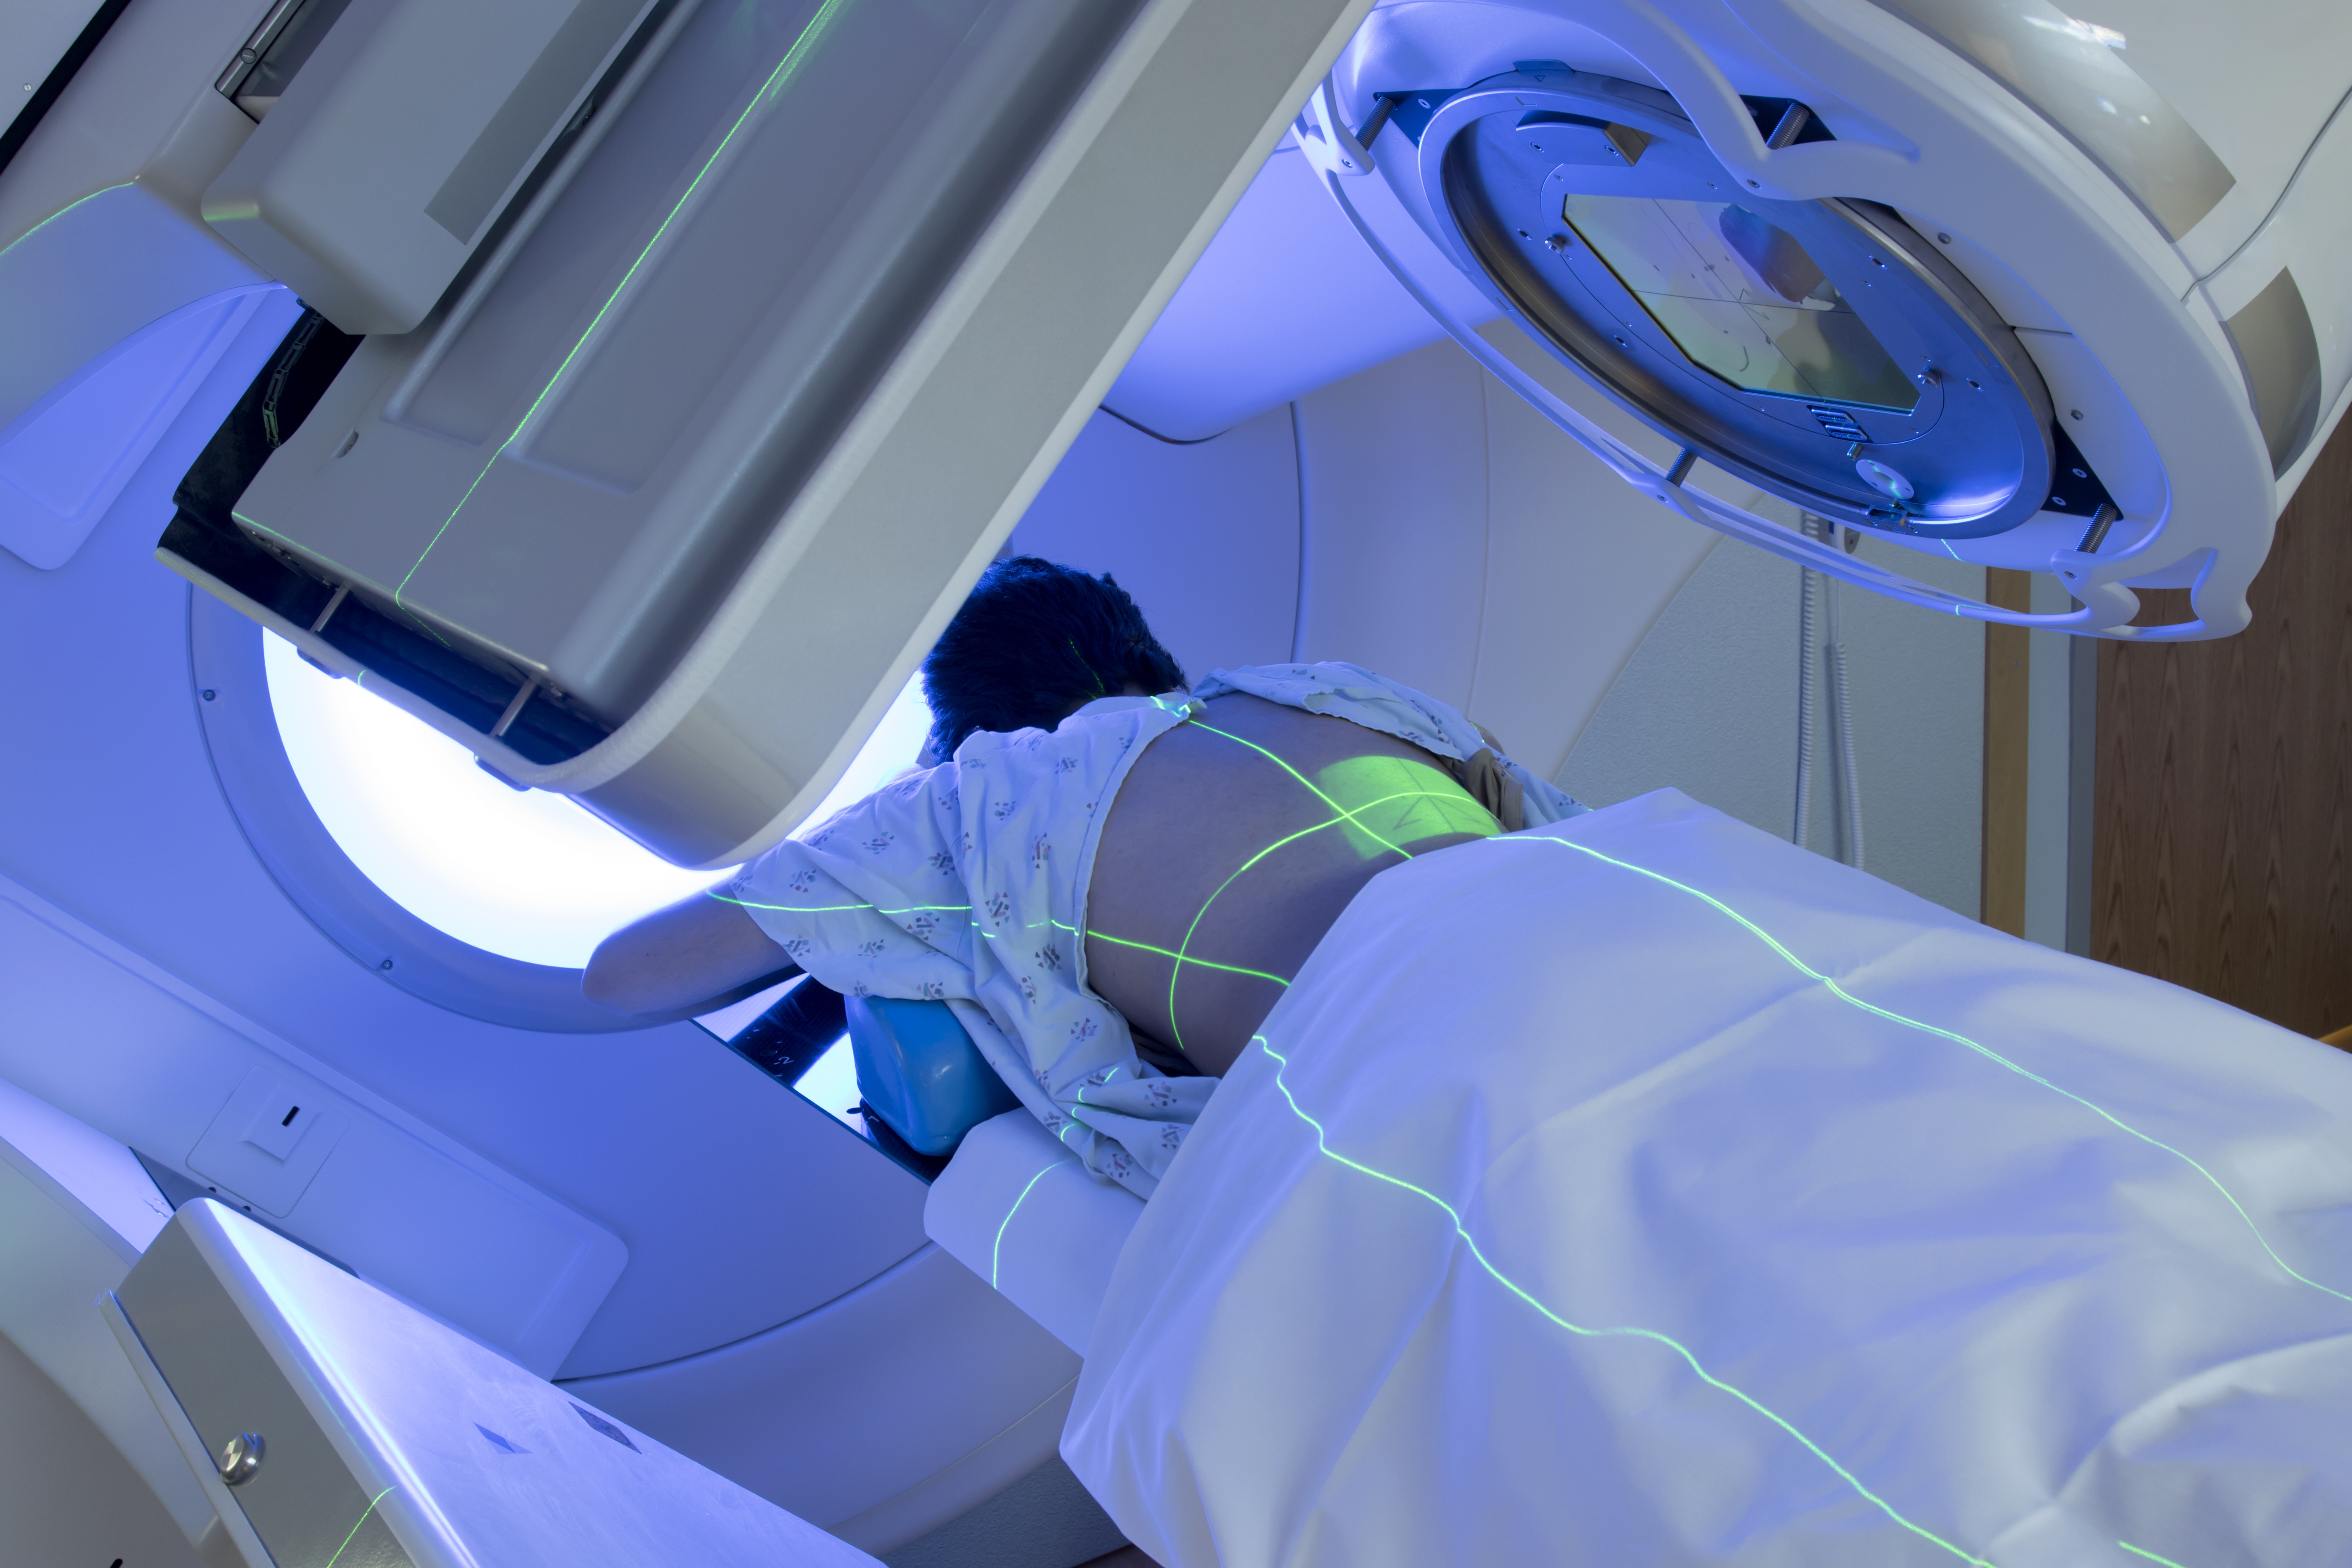 Radiation Dermatitis and Hyperbaric Oxygen Therapy